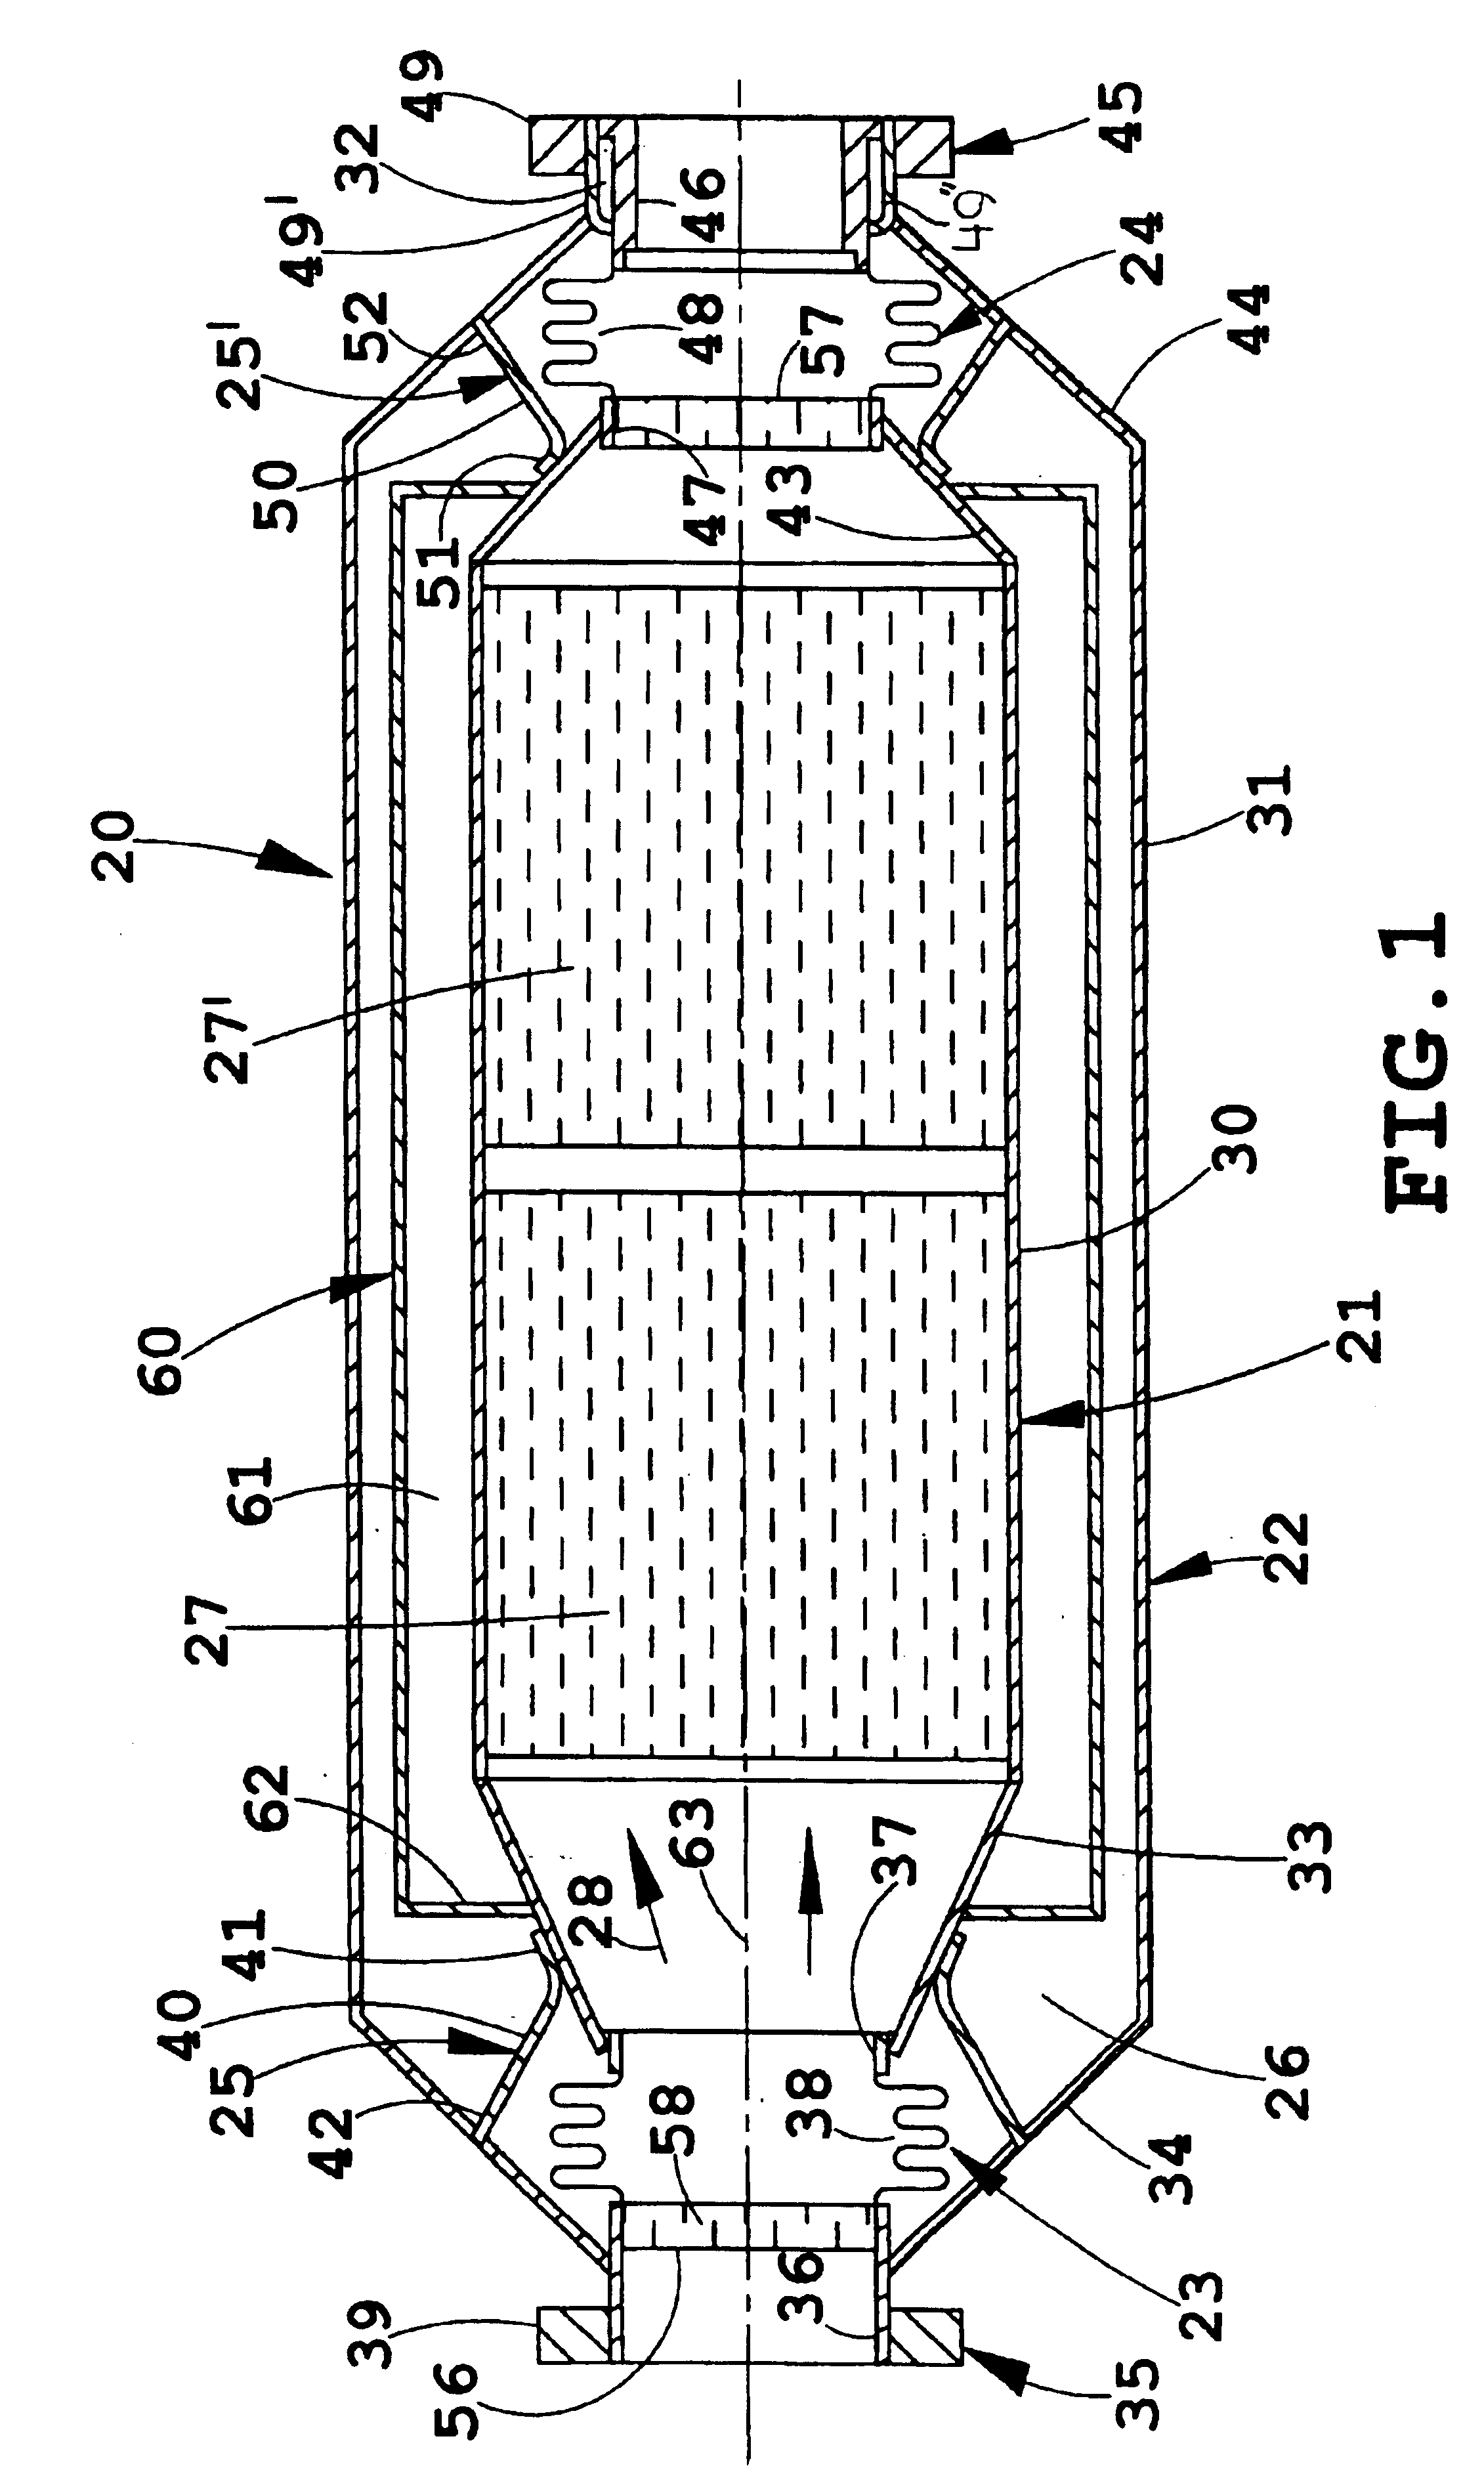 Vacuum-insulated exhaust treatment devices, such as catalytic converters, with passive controls